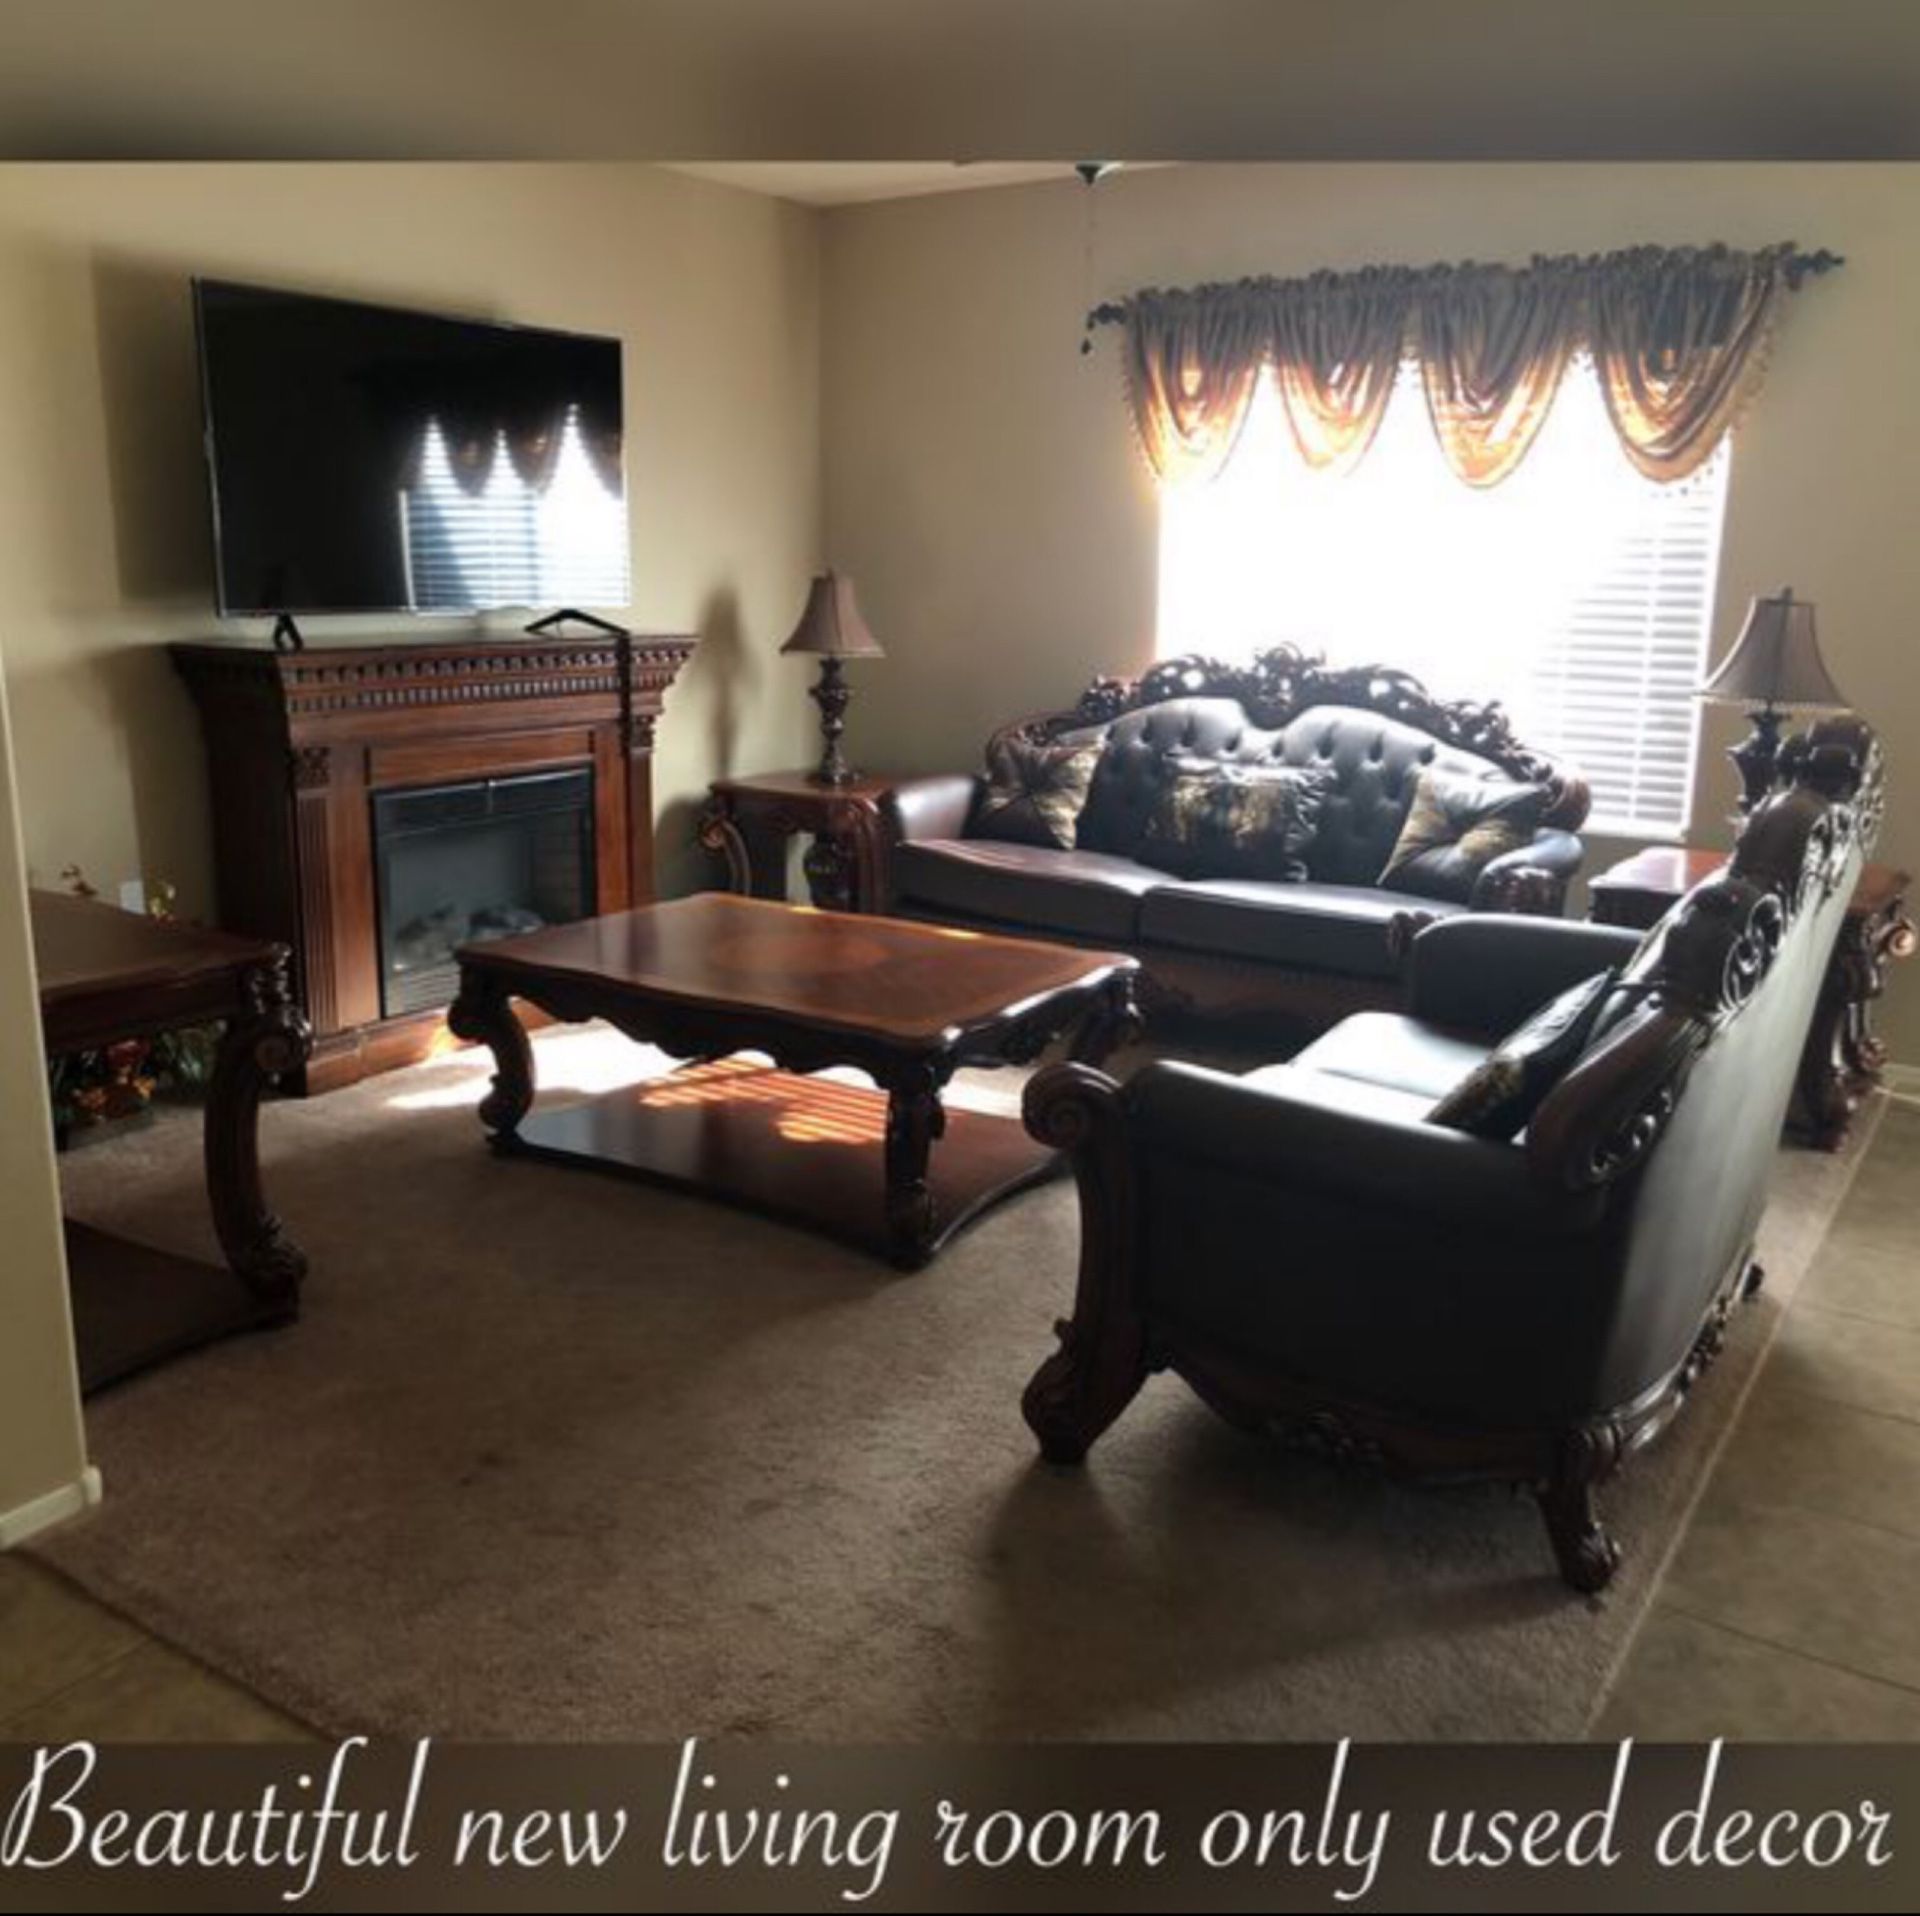 Gorgeous gently used living room set selling only as a set !other message n offers will be Ignored